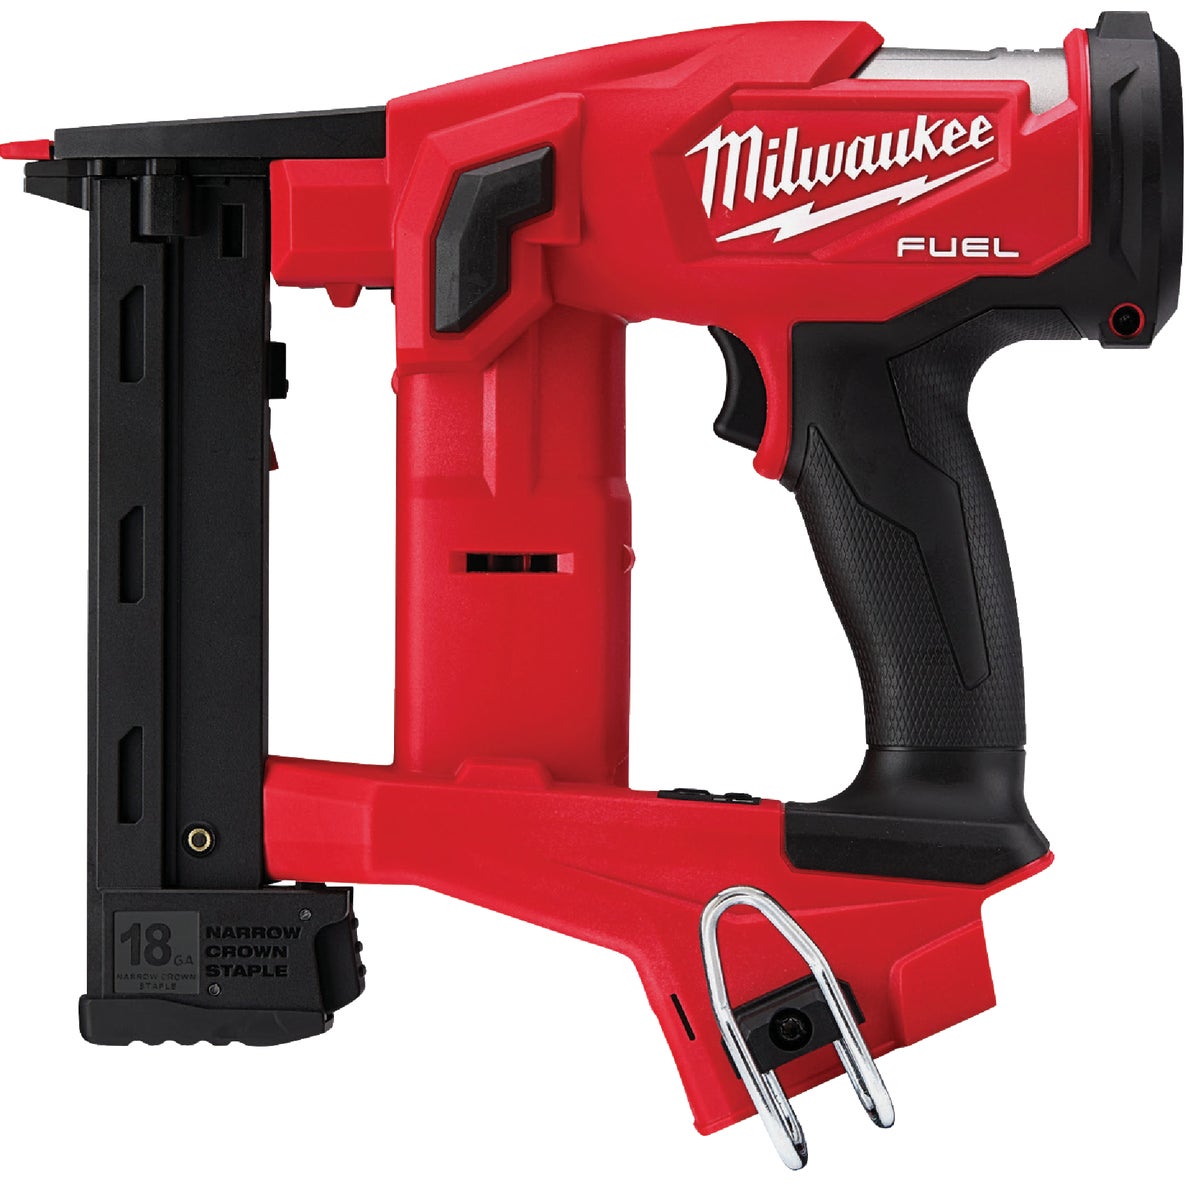 Milwaukee M18 FUEL 18 Volt Lithium-Ion 18-Gauge 1/4 In. Narrow Crown Brushless Cordless Finish Stapler (Tool Only)